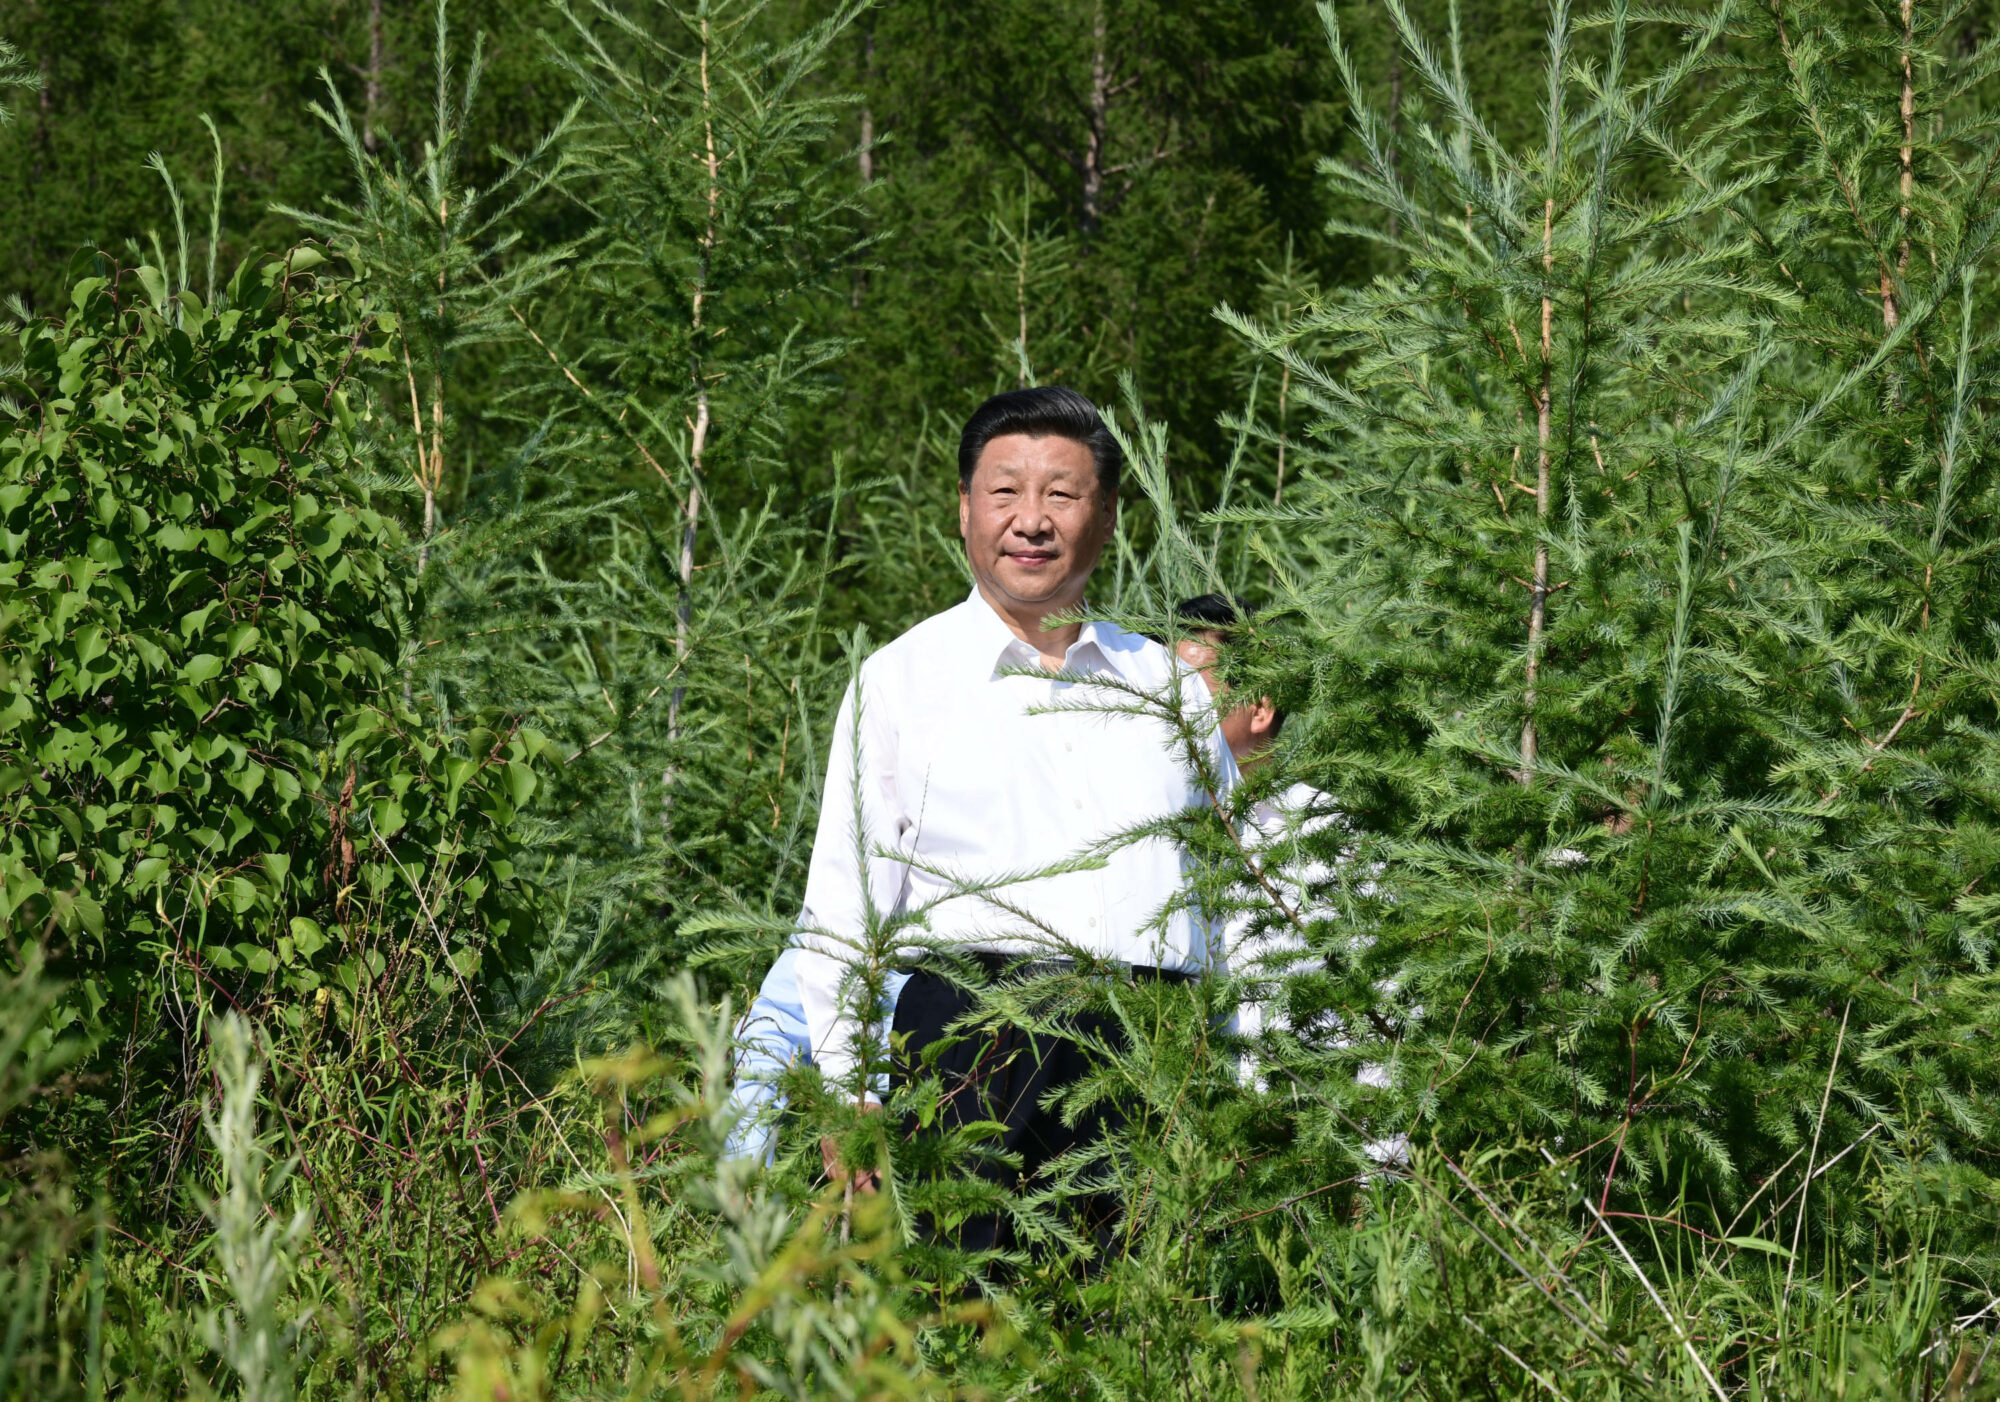 <p>Xi Jinping visits a forest farm in China’s Inner Mongolia Autonomous Region in July 2019 to learn about approaches to building “ecological civilisation”, a concept that has gained significant political traction during his presidency (Image: Xinhua / Alamy)</p>